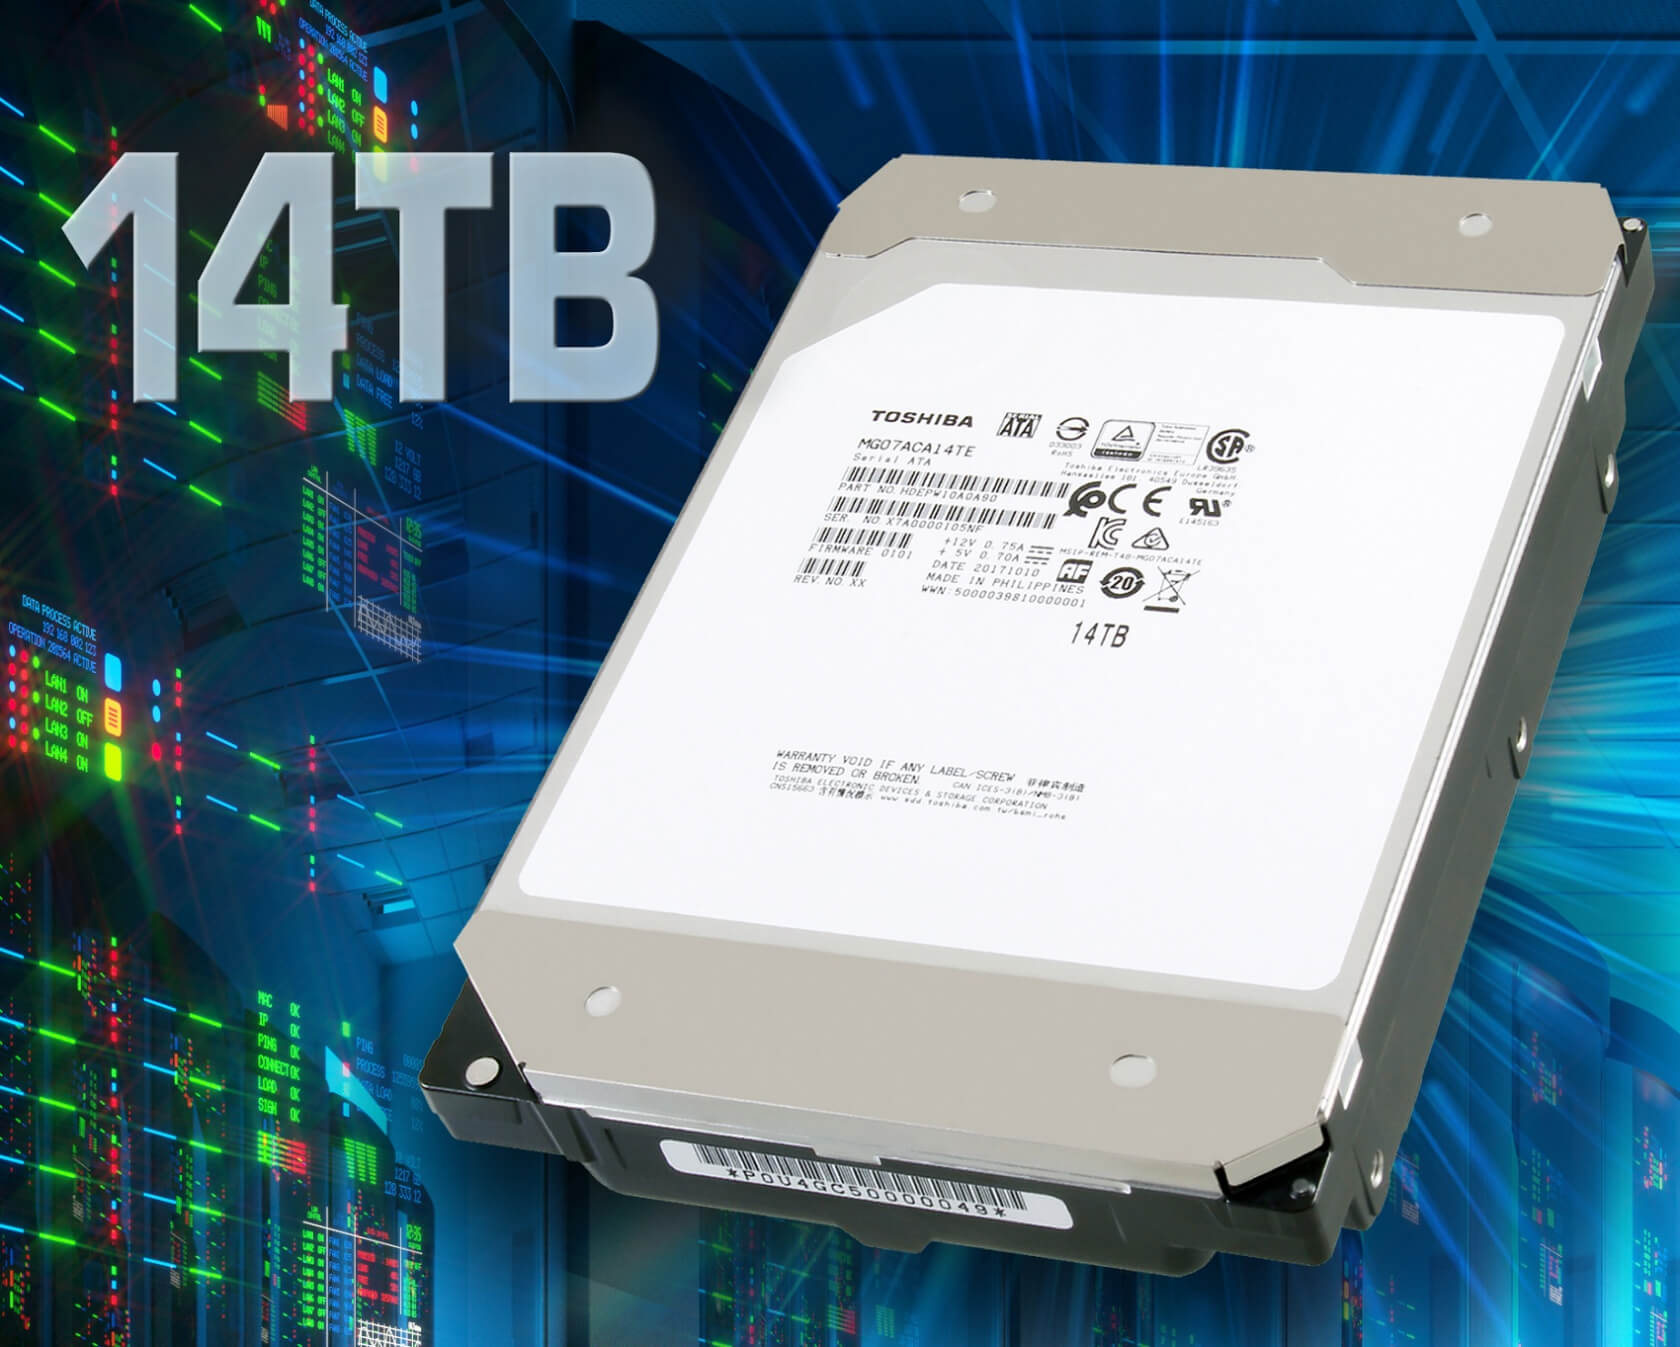 Toshiba unveils world's first 14 TB hard drive to use conventional magnetic recording